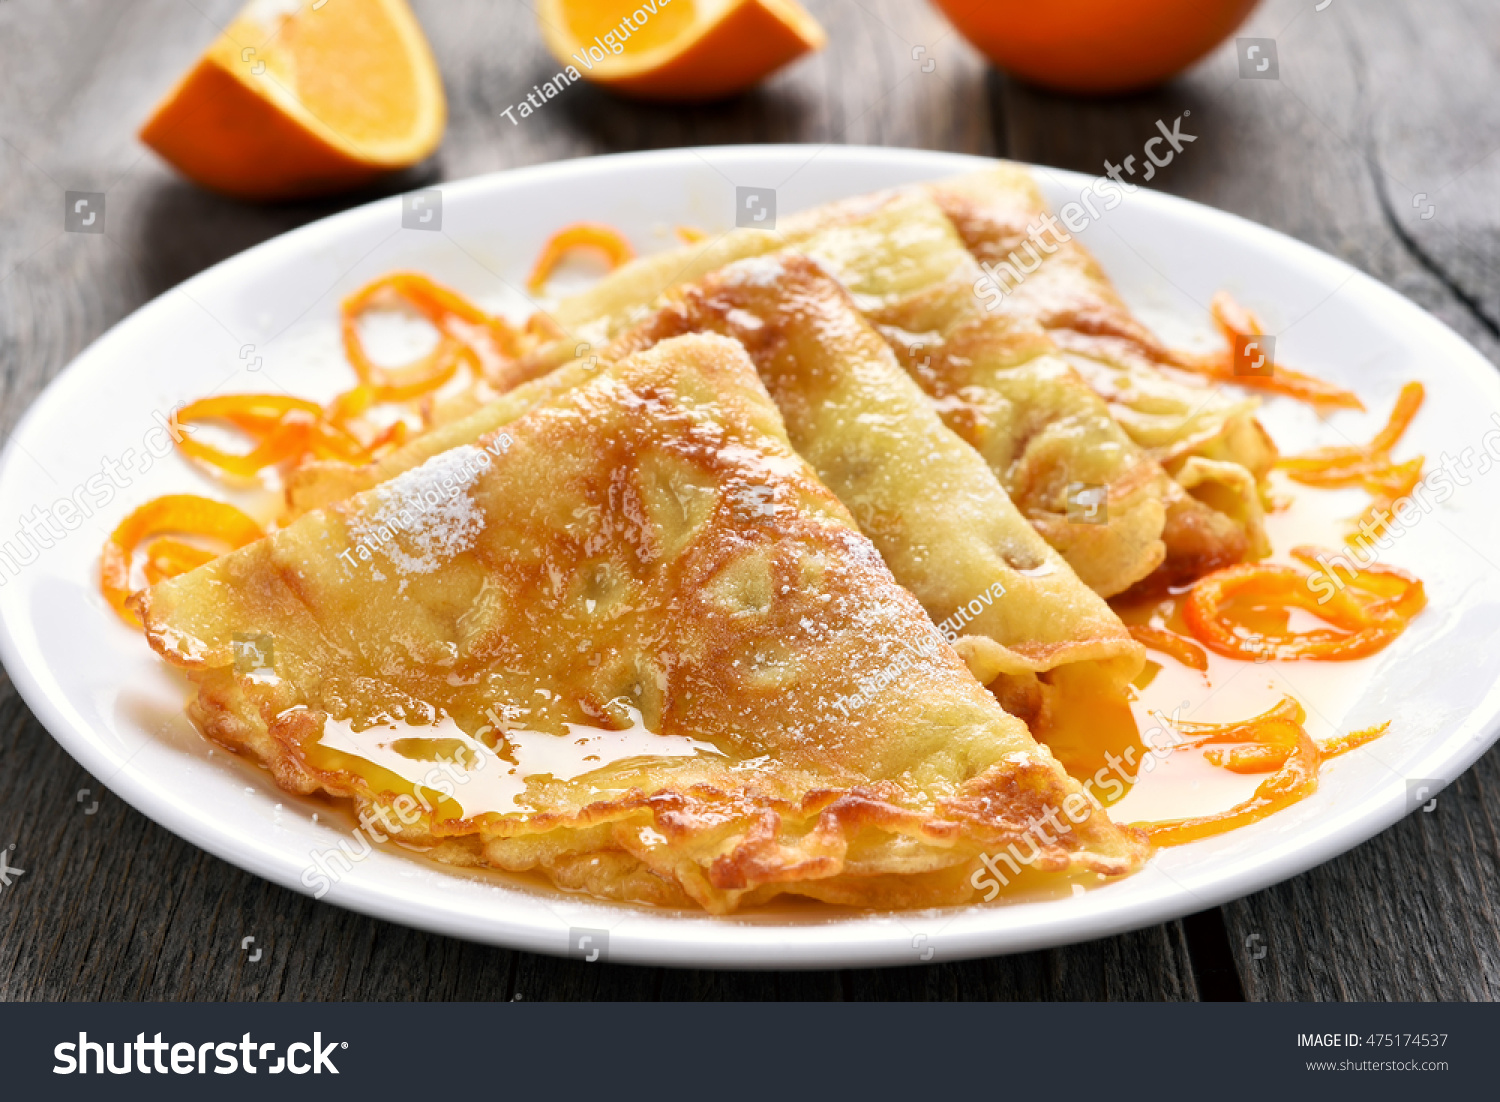 Delicious crepes suzette with orange syrup on plate. #475174537